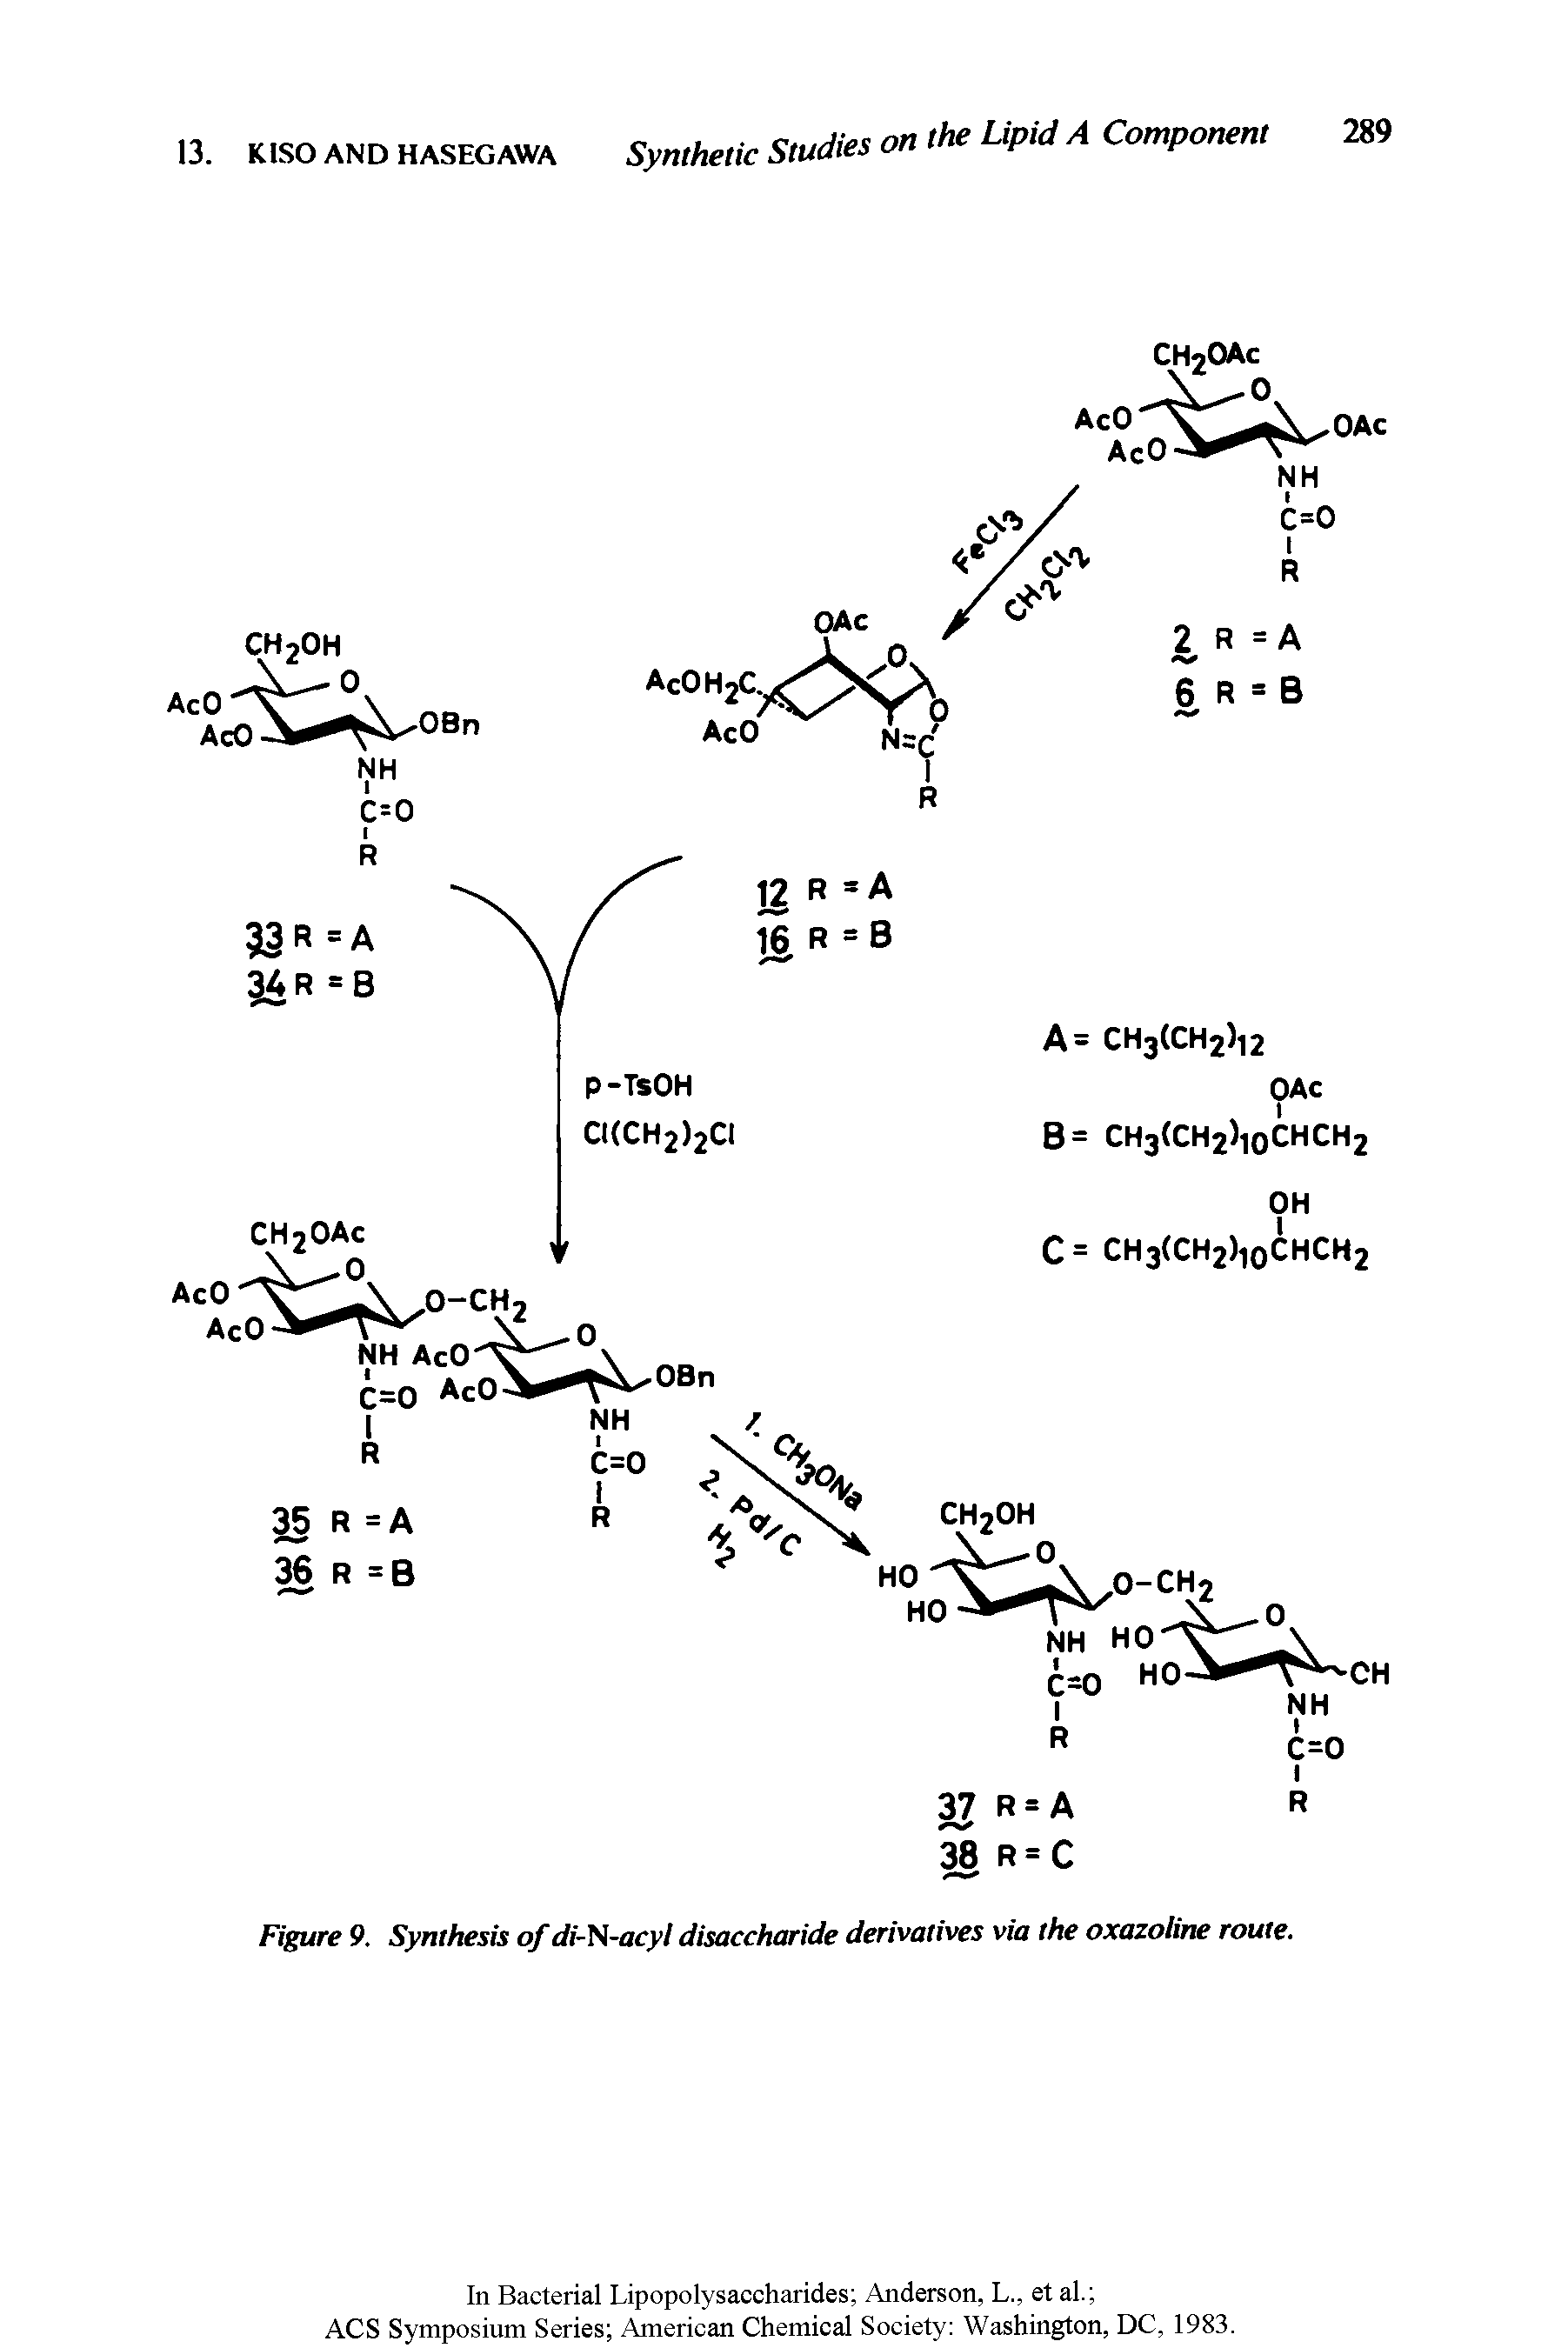 Figure 9. Synthesis of di-N-acyl disaccharide derivatives via the oxazoline route.